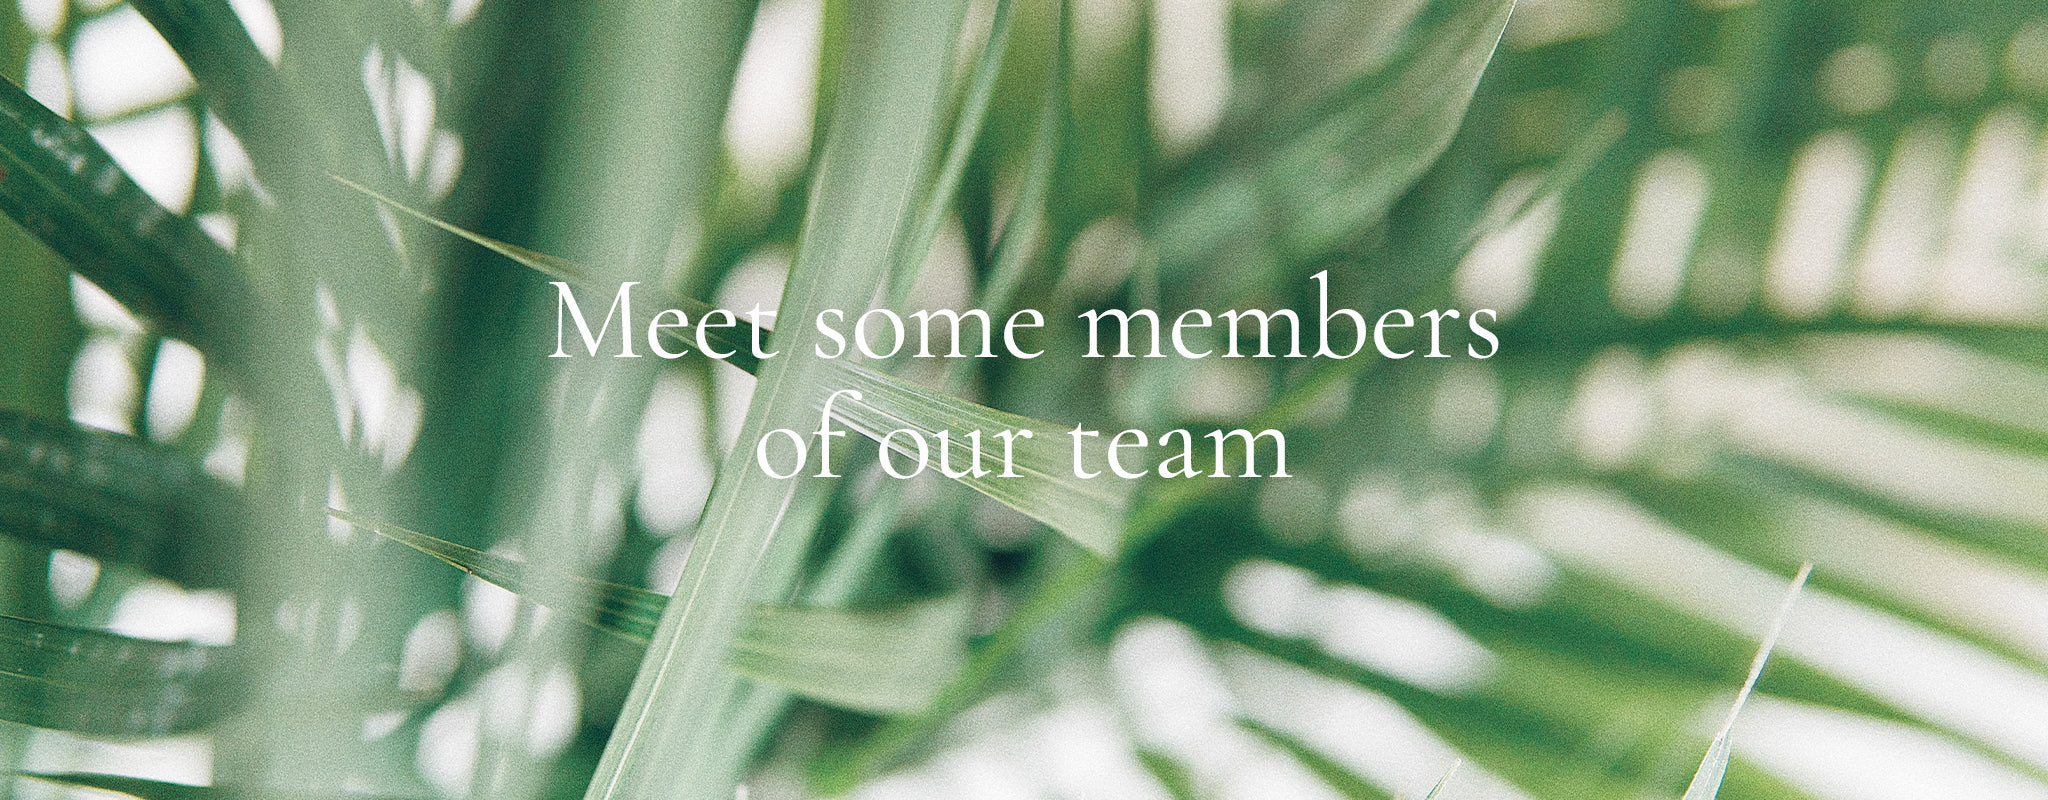 Meet some members of our team